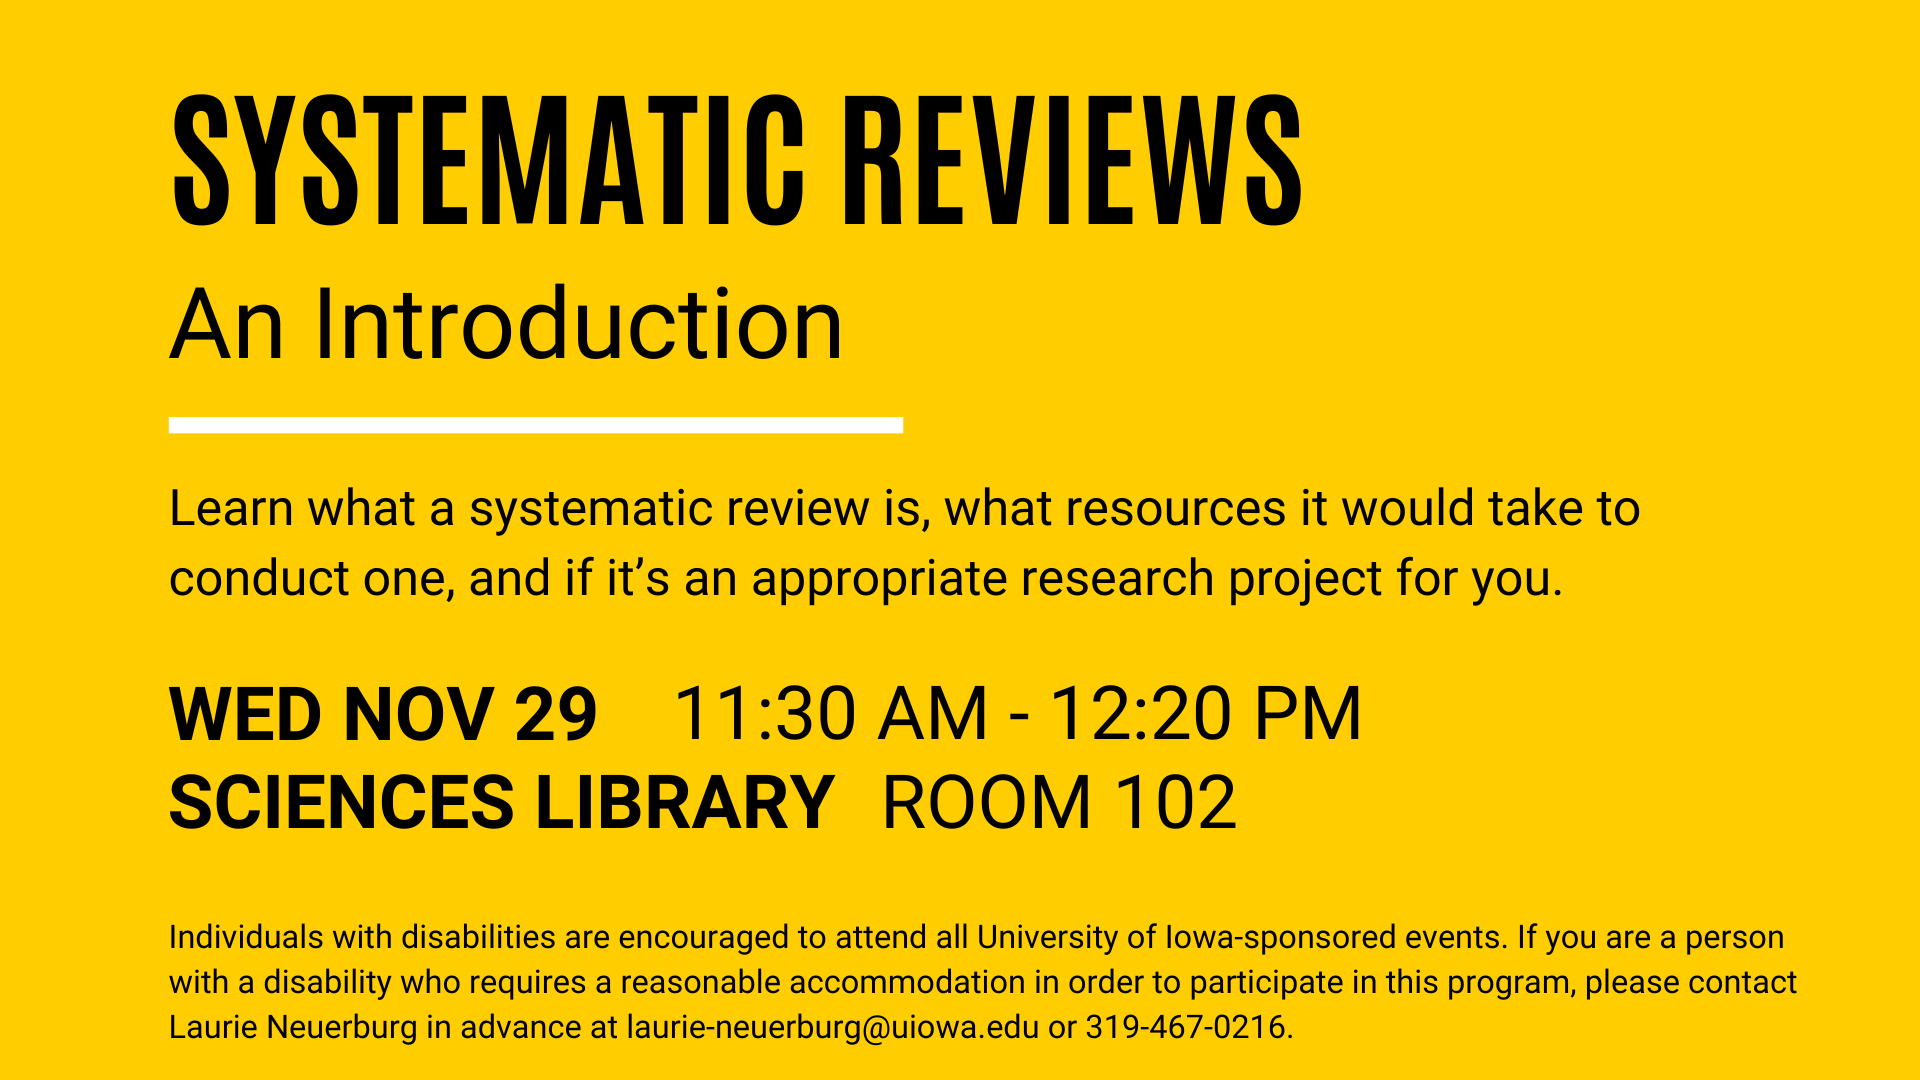 Learn what a systematic review is, what resources it would take to conduct one, and how you can explore whether it might be an appropriate research project for you.      